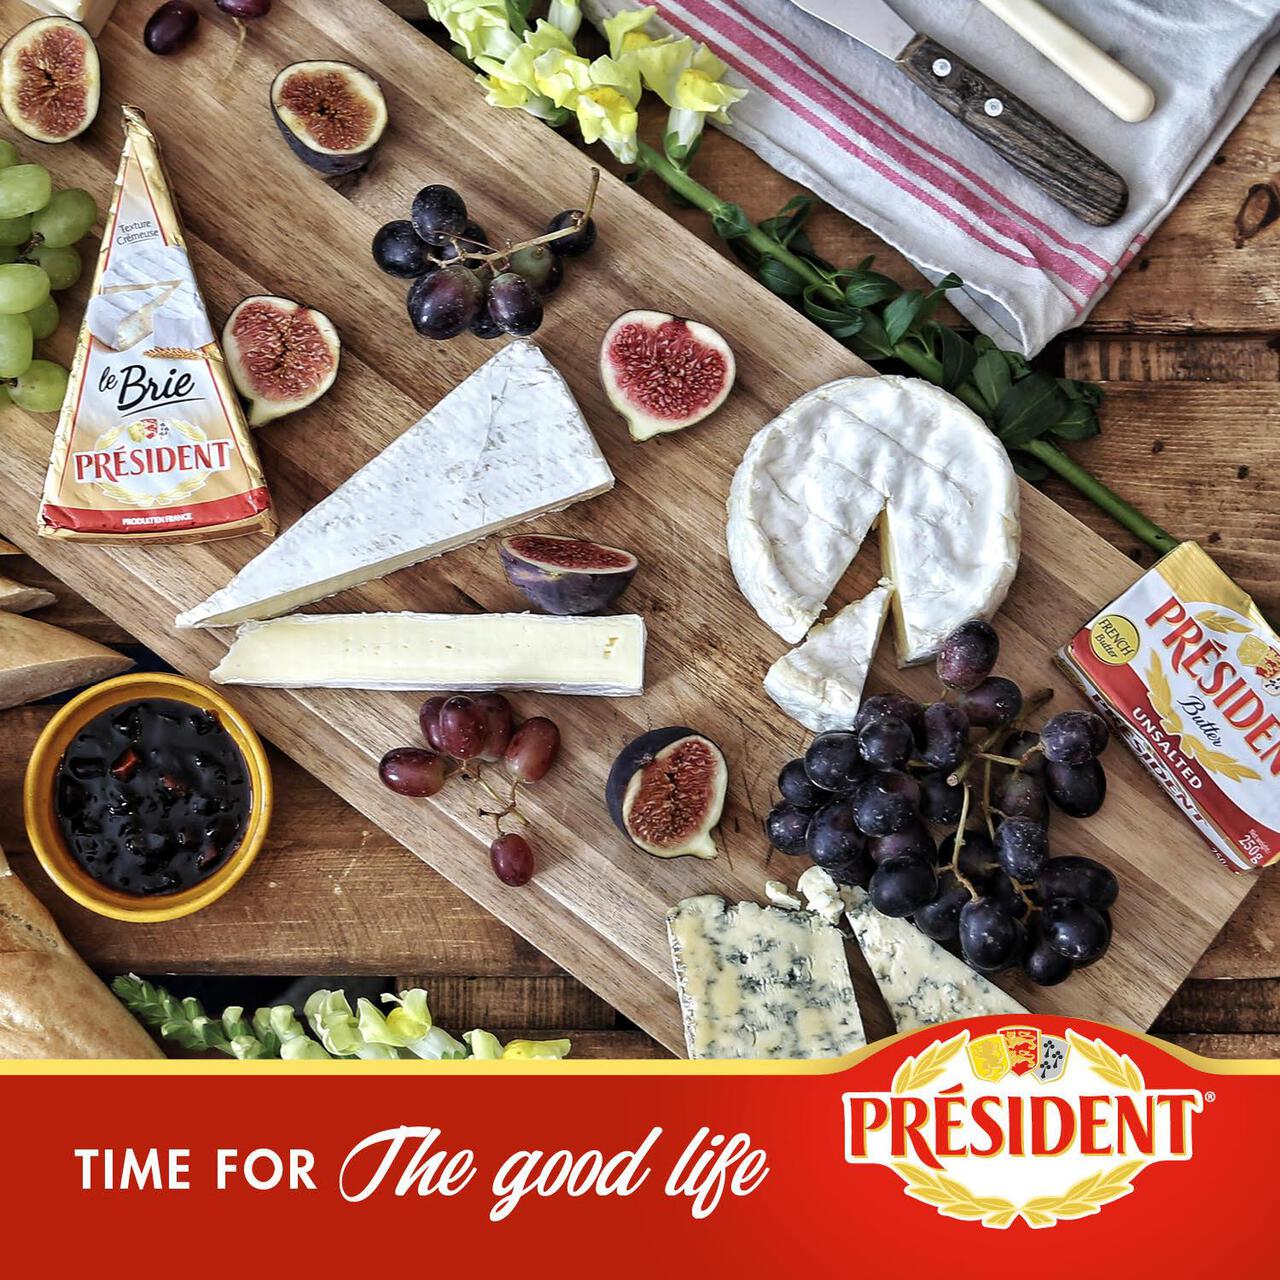 President French Unsalted Butter 250g